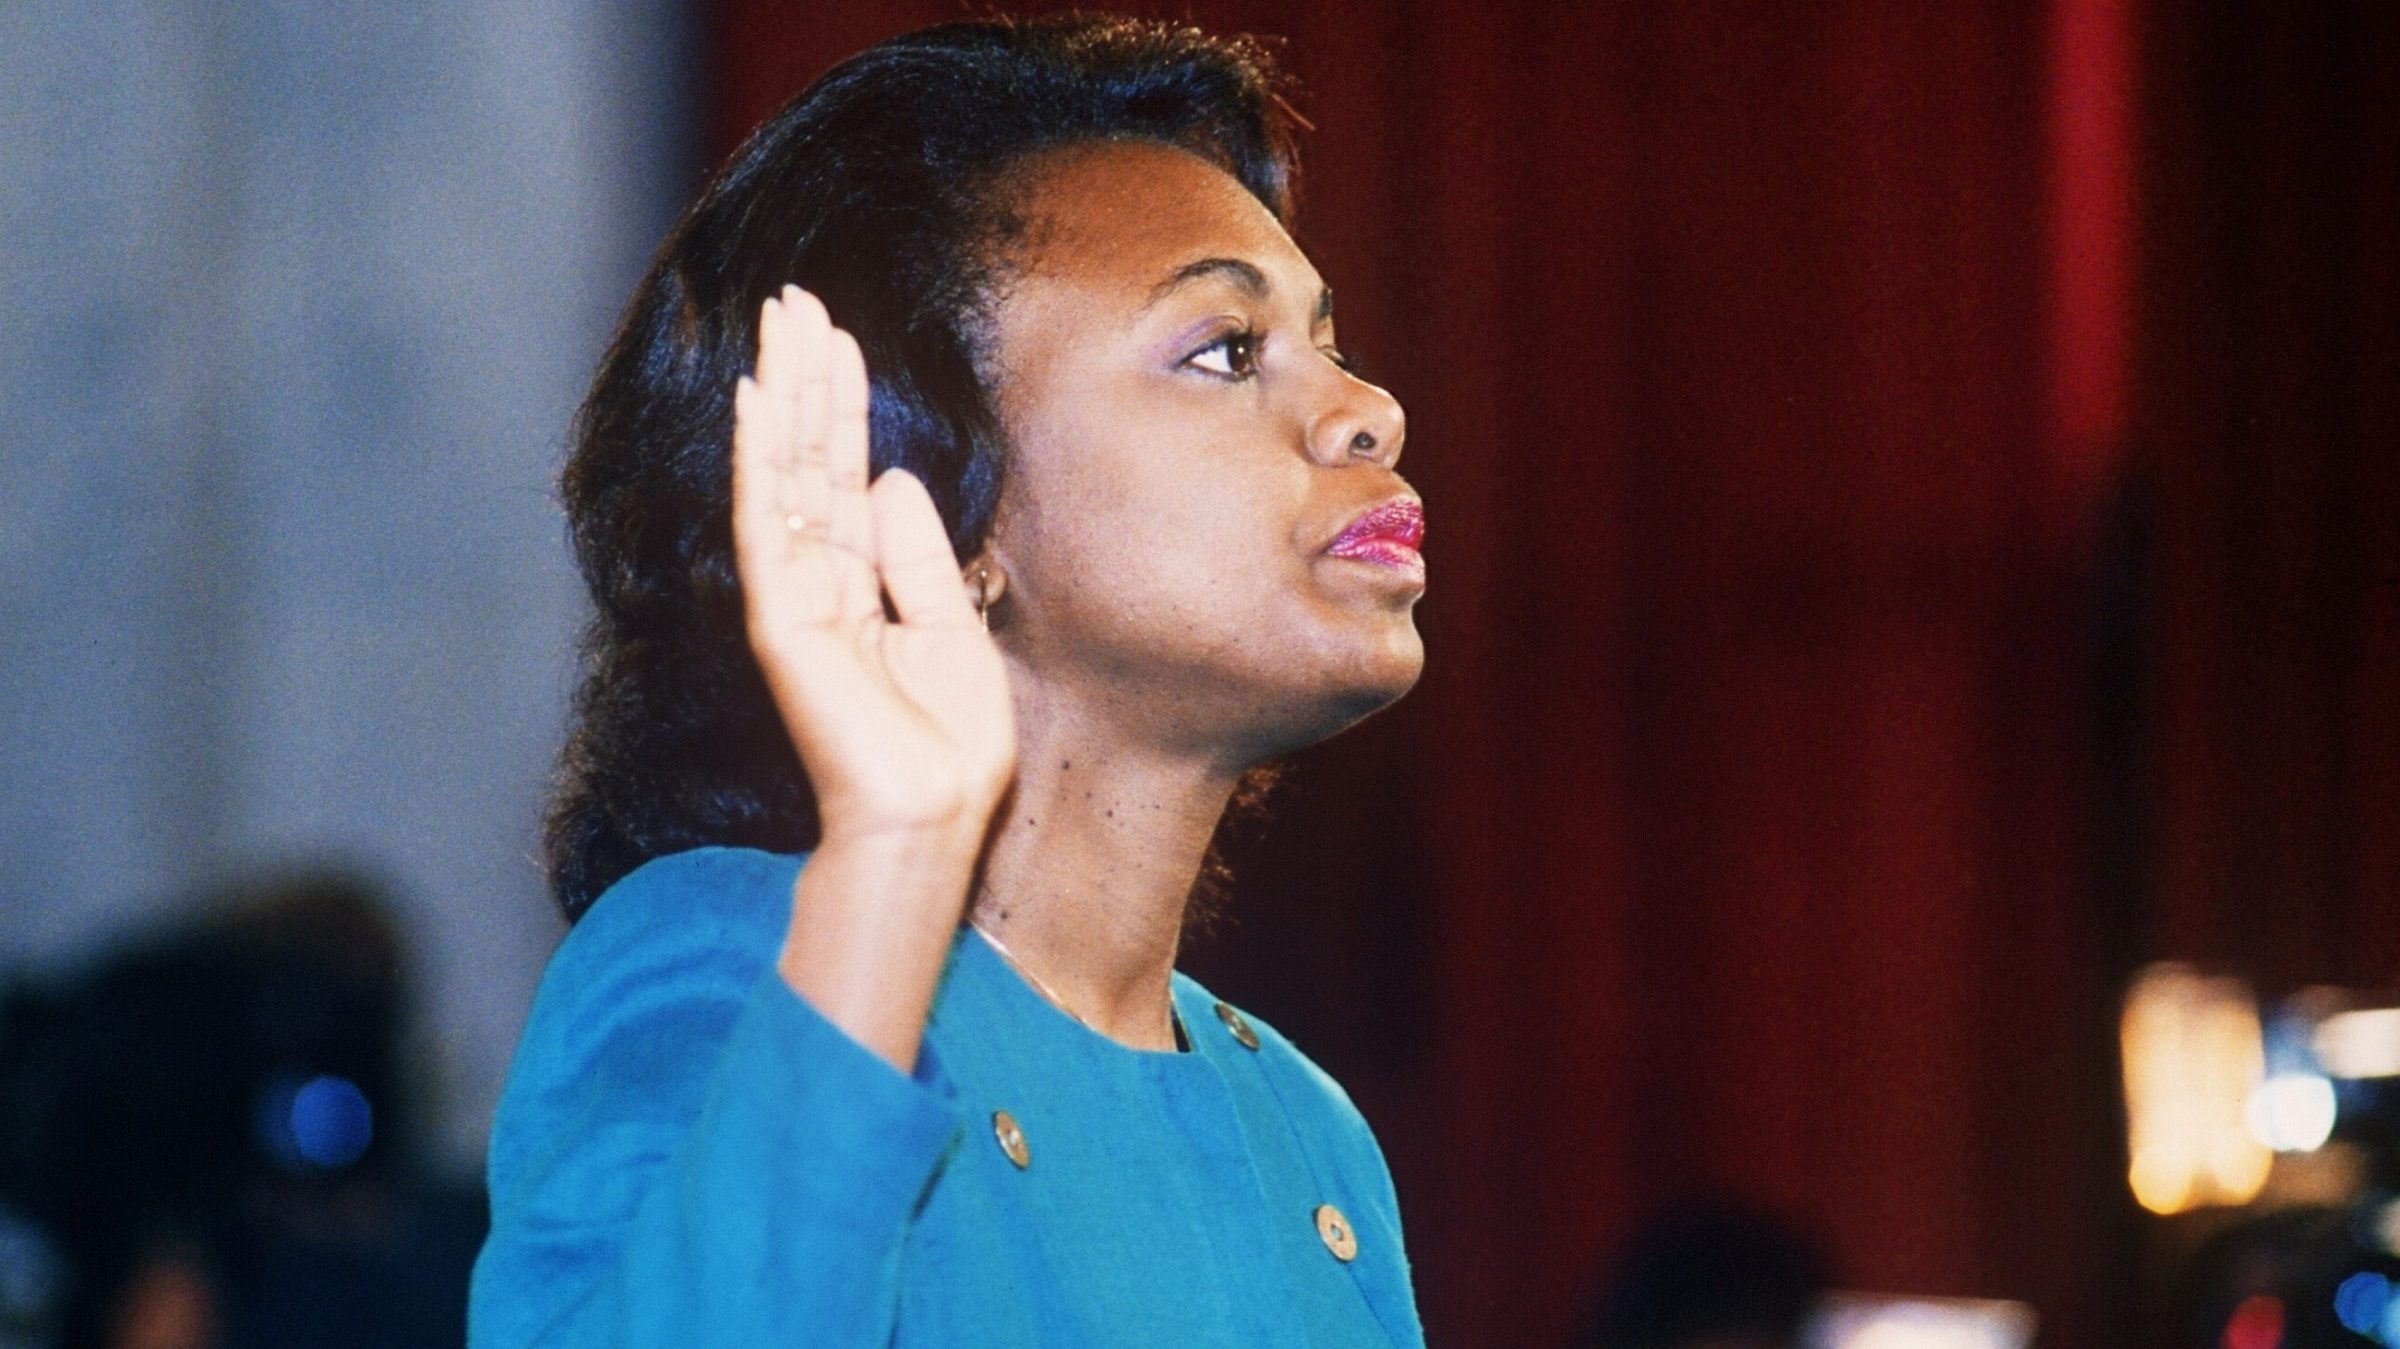 US law professor Anita Hill takes oath, 12 October 1991, before the Senate Judiciary Committee in Washington D.C.. Hill filed sexual harassment charges against US Supreme Court nominee Clarence Thomas.